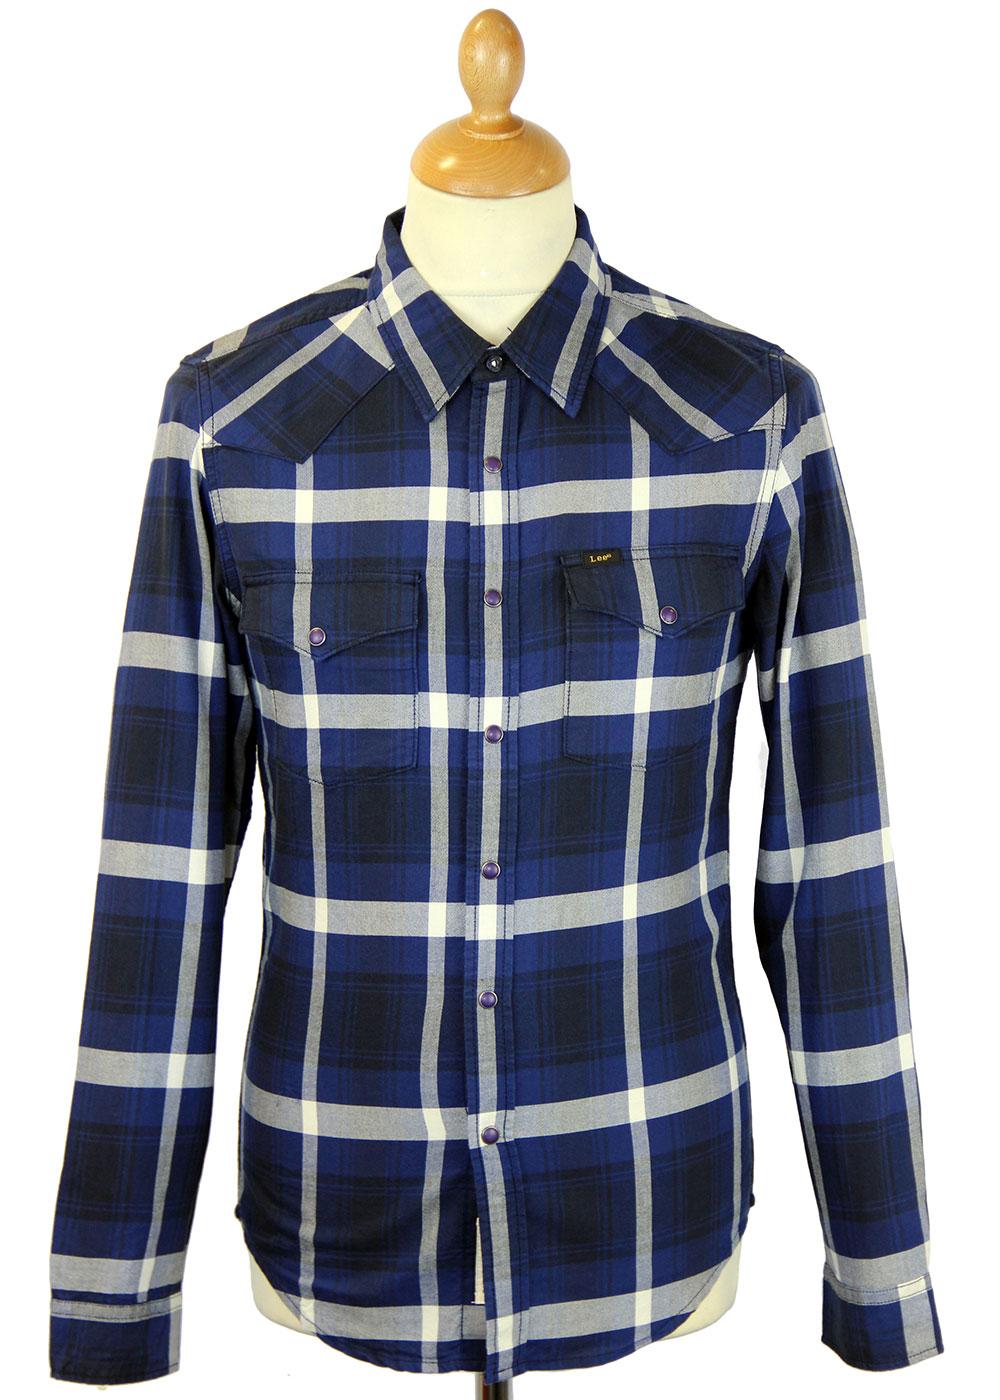 LEE Jeans Retro Indie Mod Check Western Shirt Medieval Blue